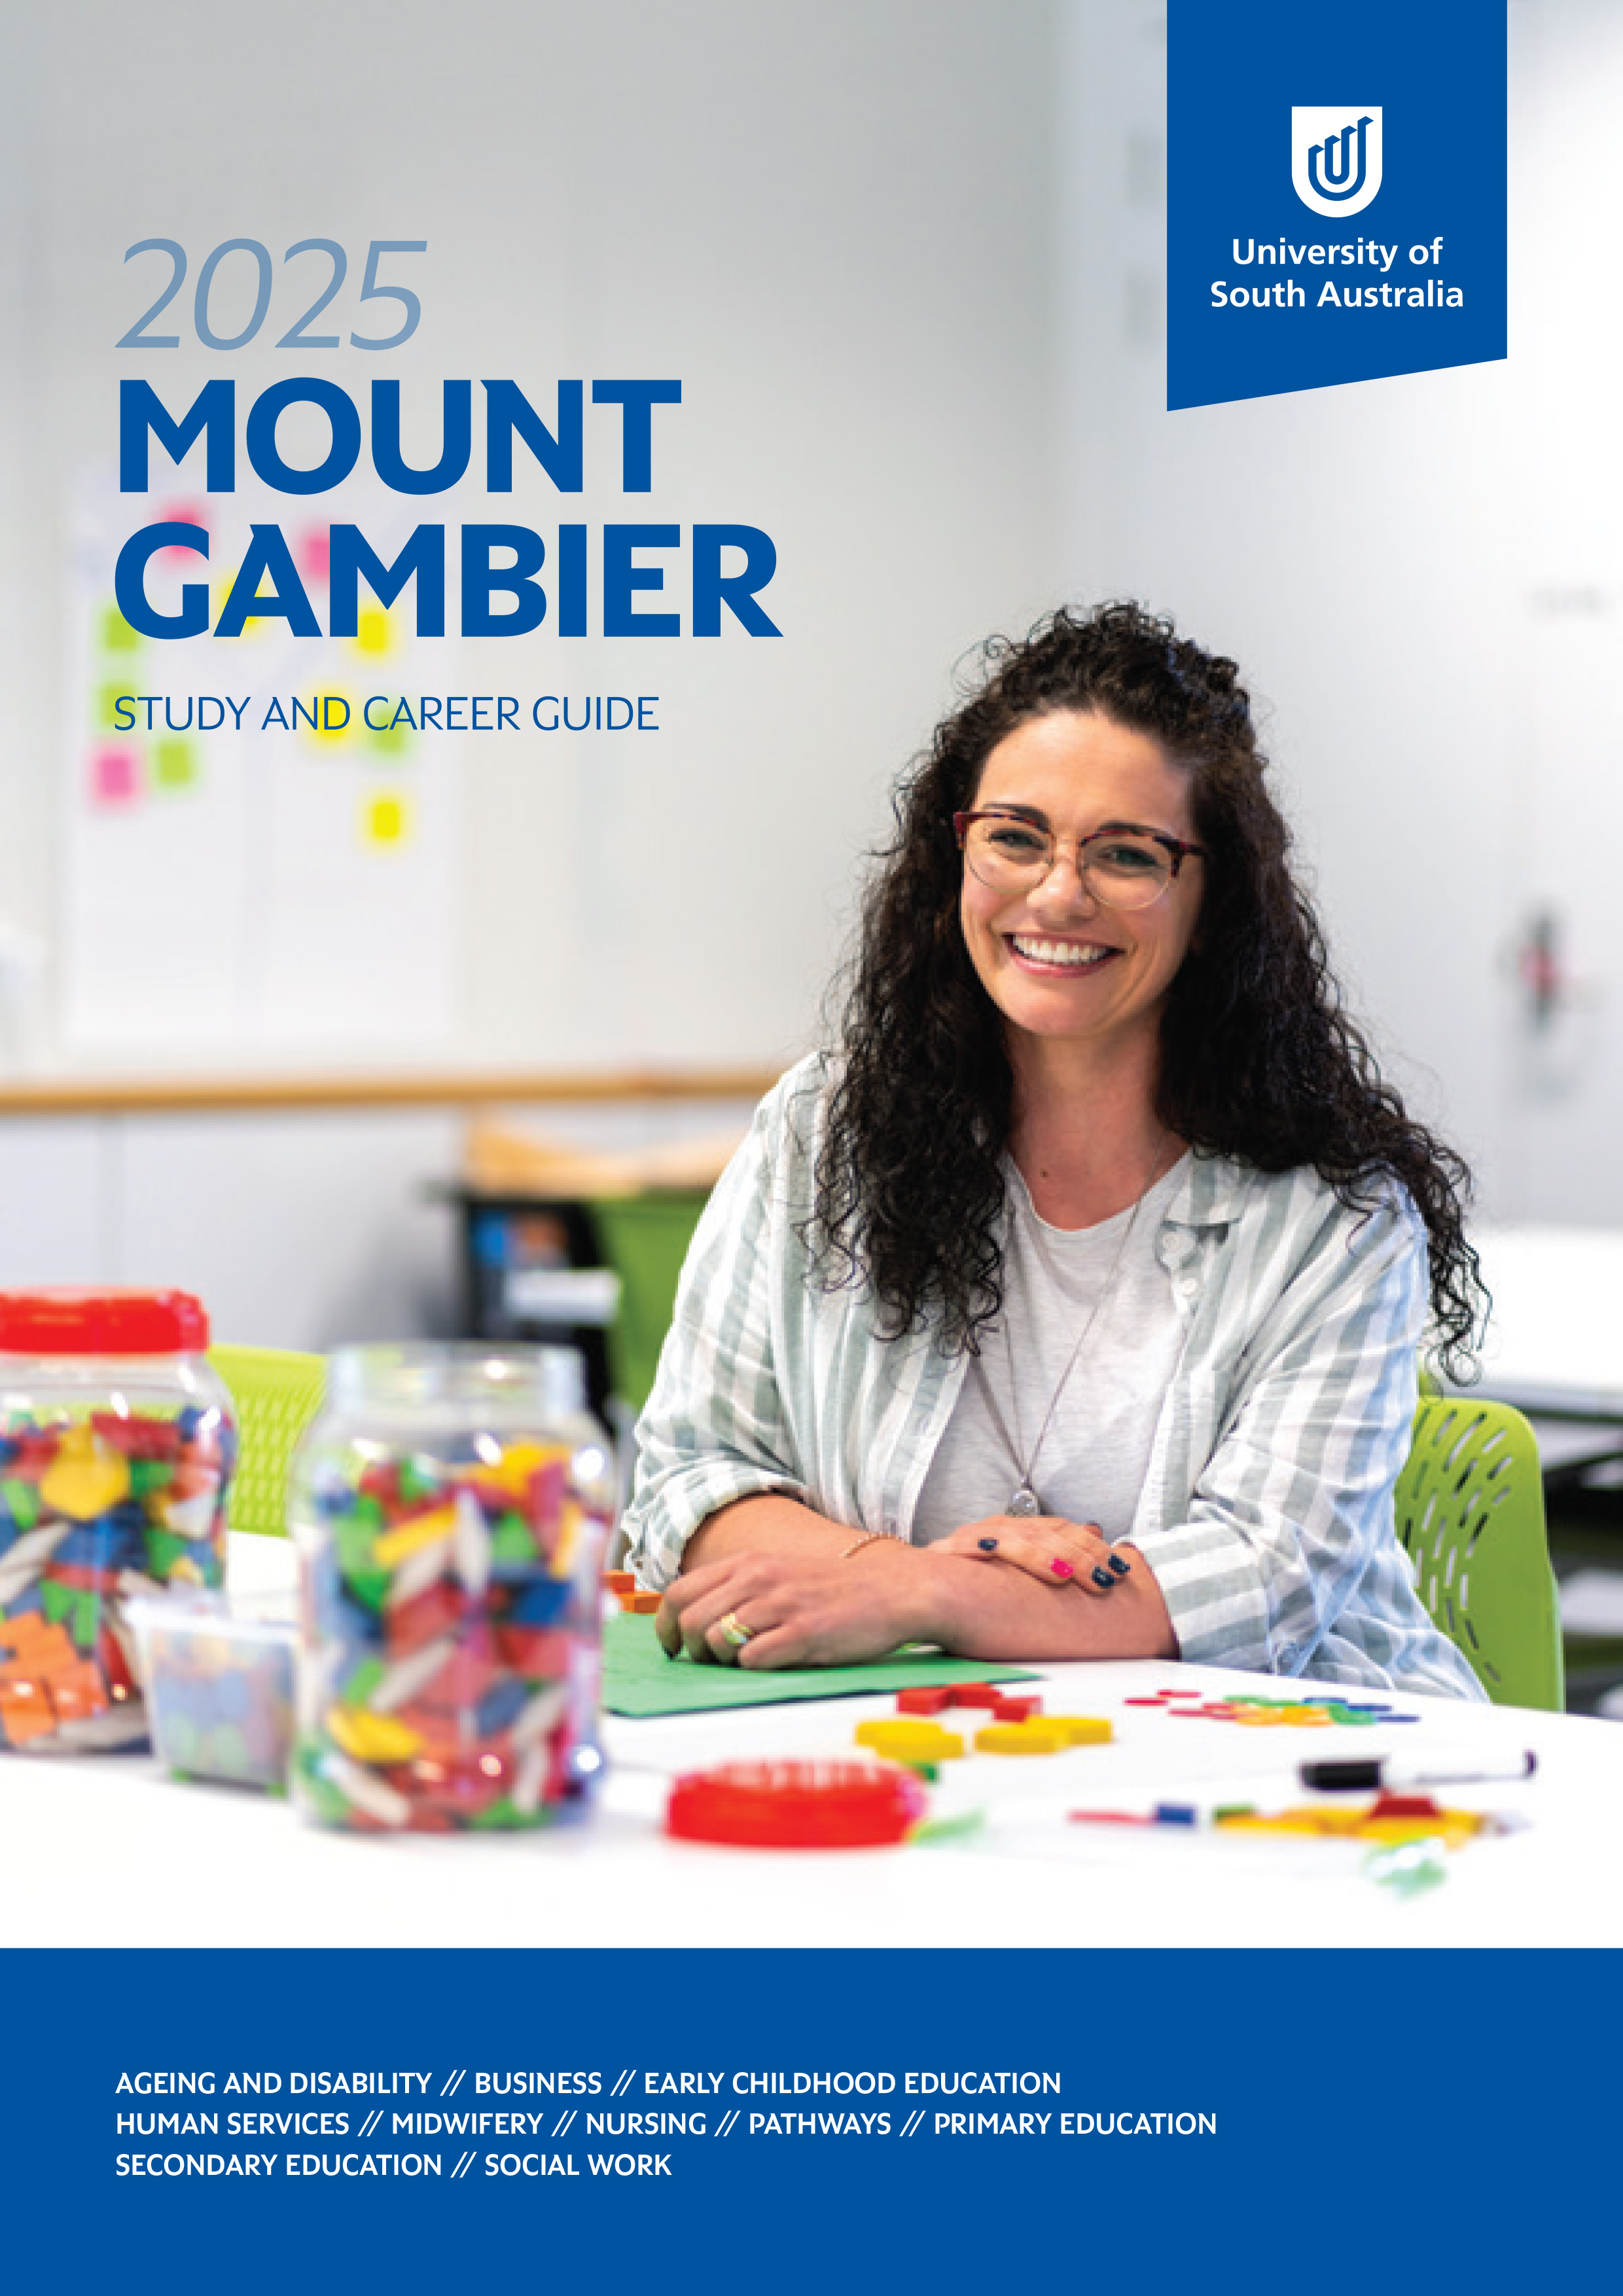 Mt Gambier Study and Career Guide